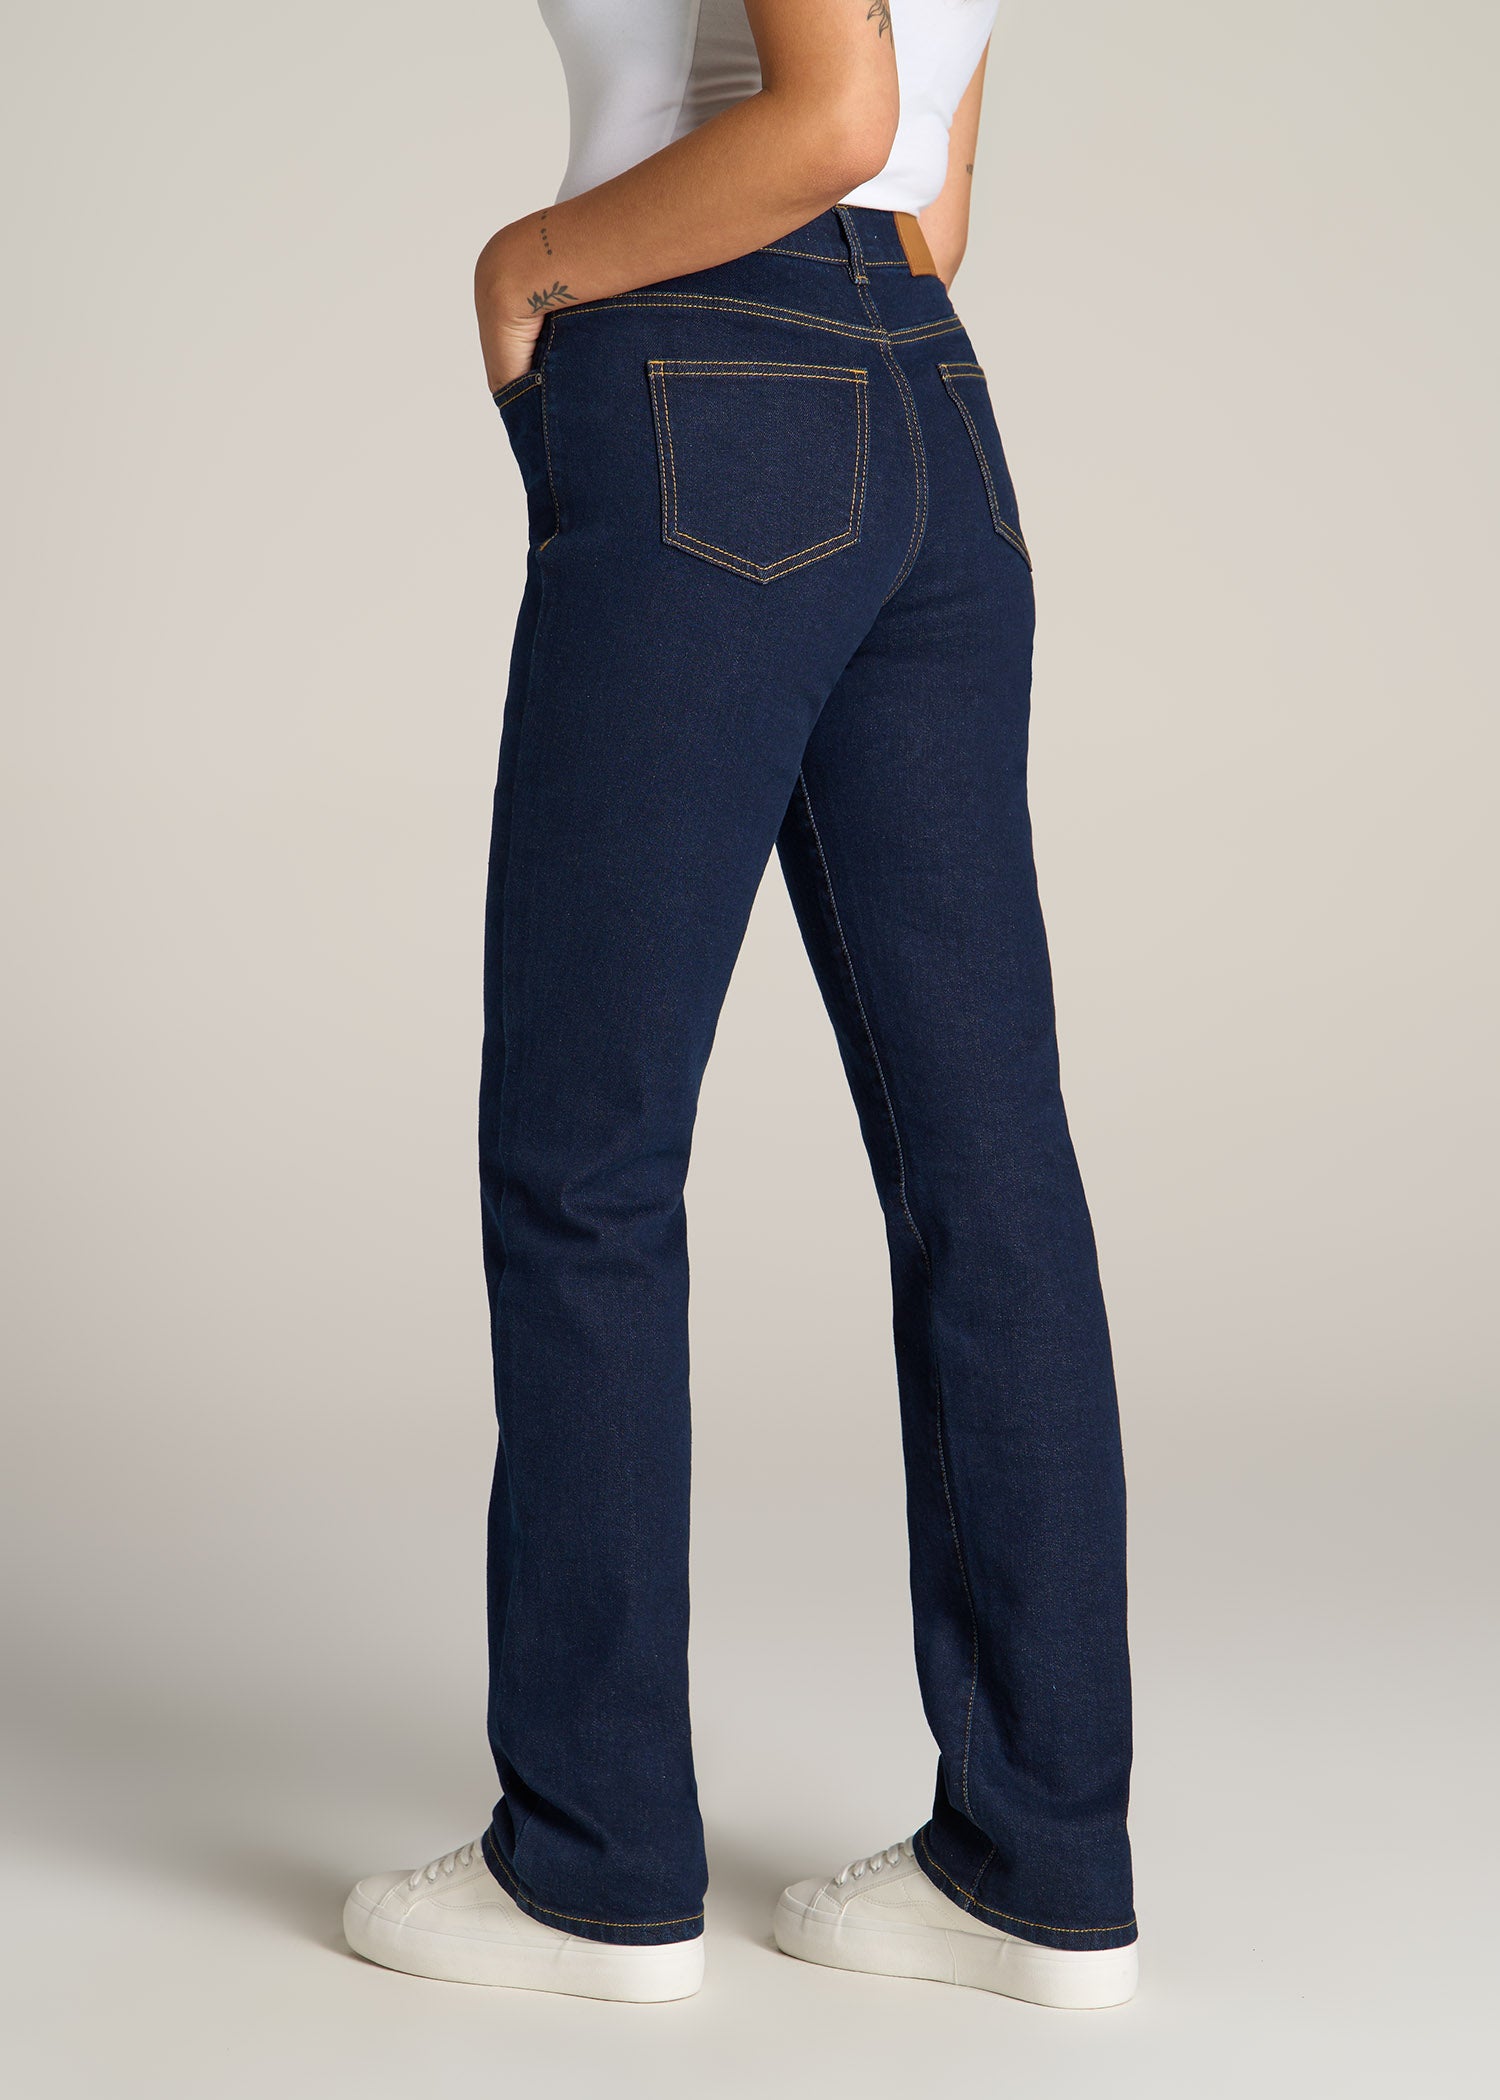 Harper High Rise Straight Stretch Tall Women's Jeans in Ink Blue